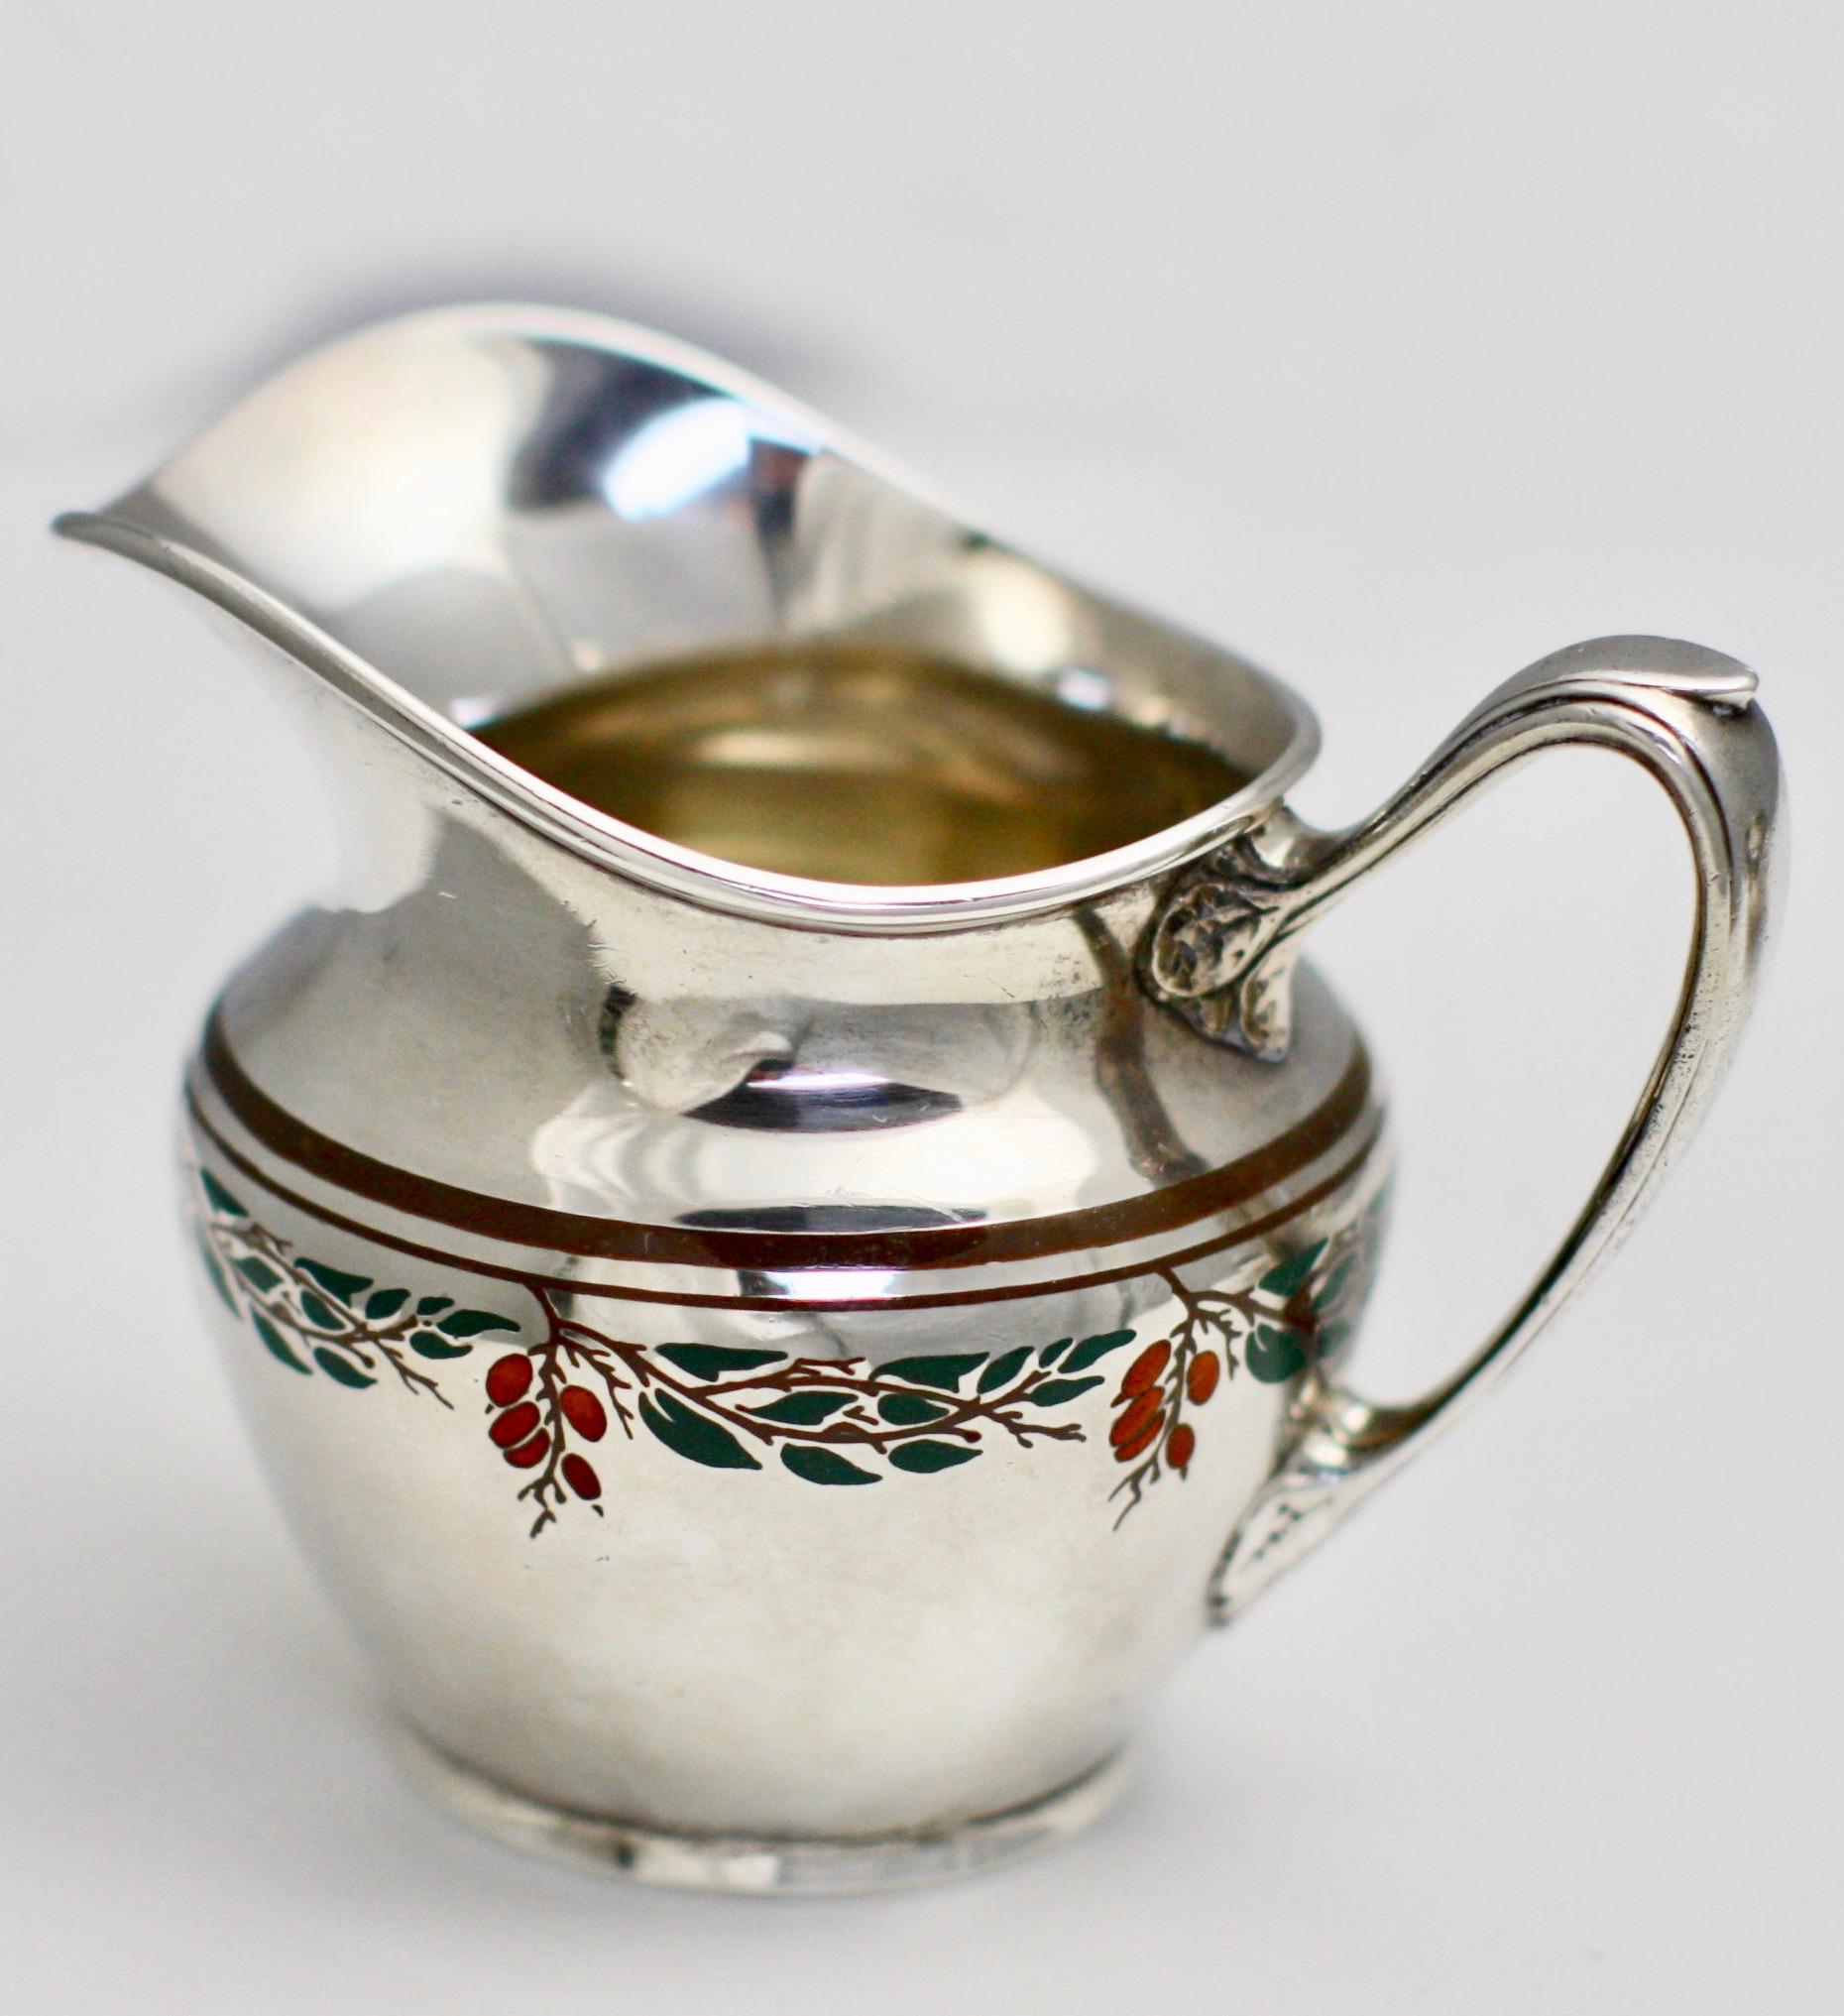 Vintage Sterling Silver and Enamel Jug and Bowl R. Blackinton & Co. In Good Condition For Sale In West Palm Beach, FL